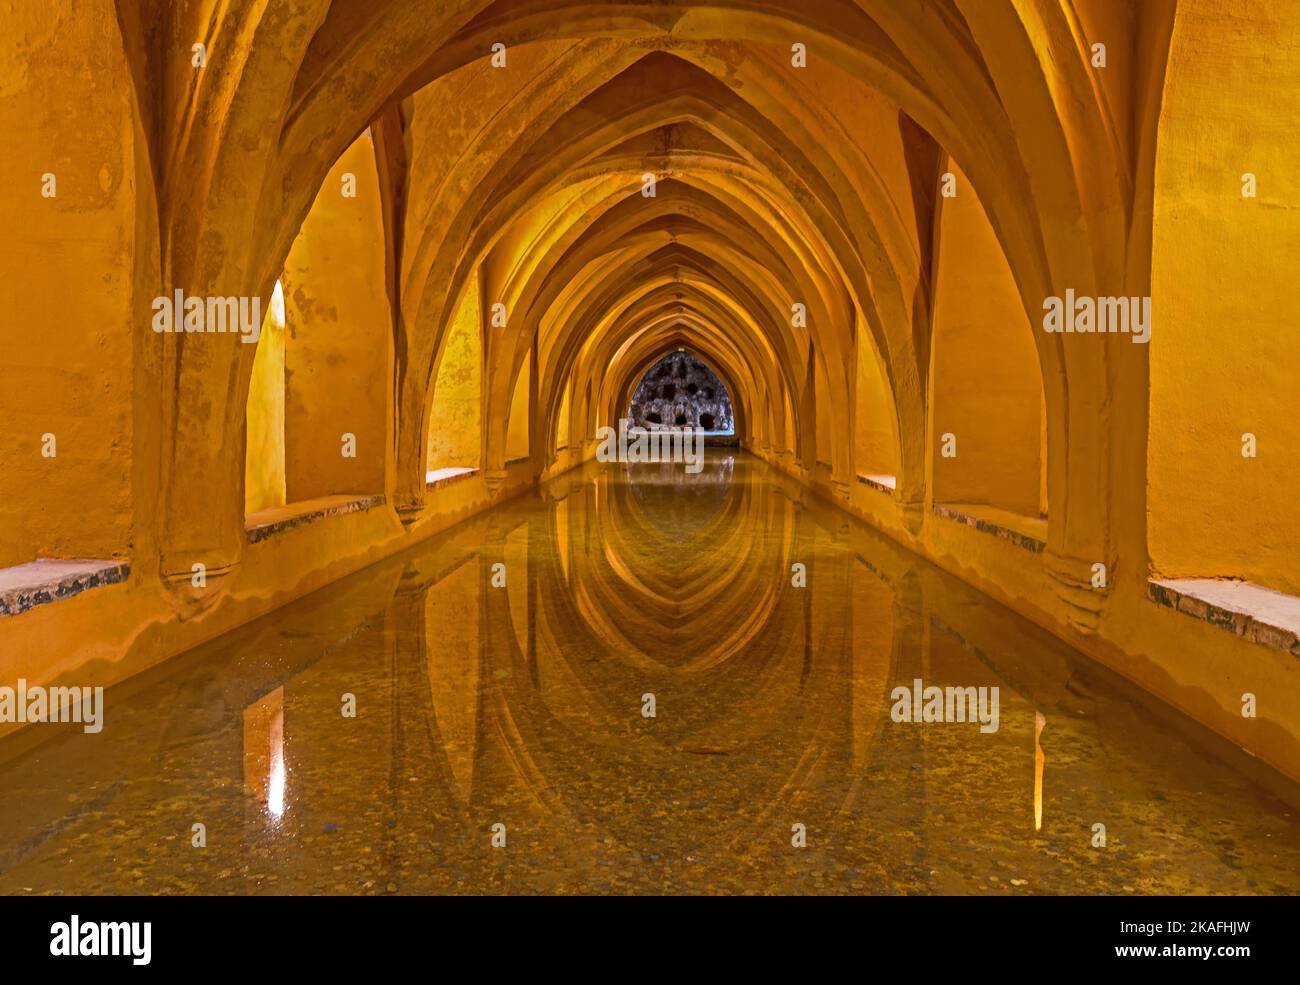 An image of the baths of Maria de Padilla located in the Alcazar Seville Stock Photo